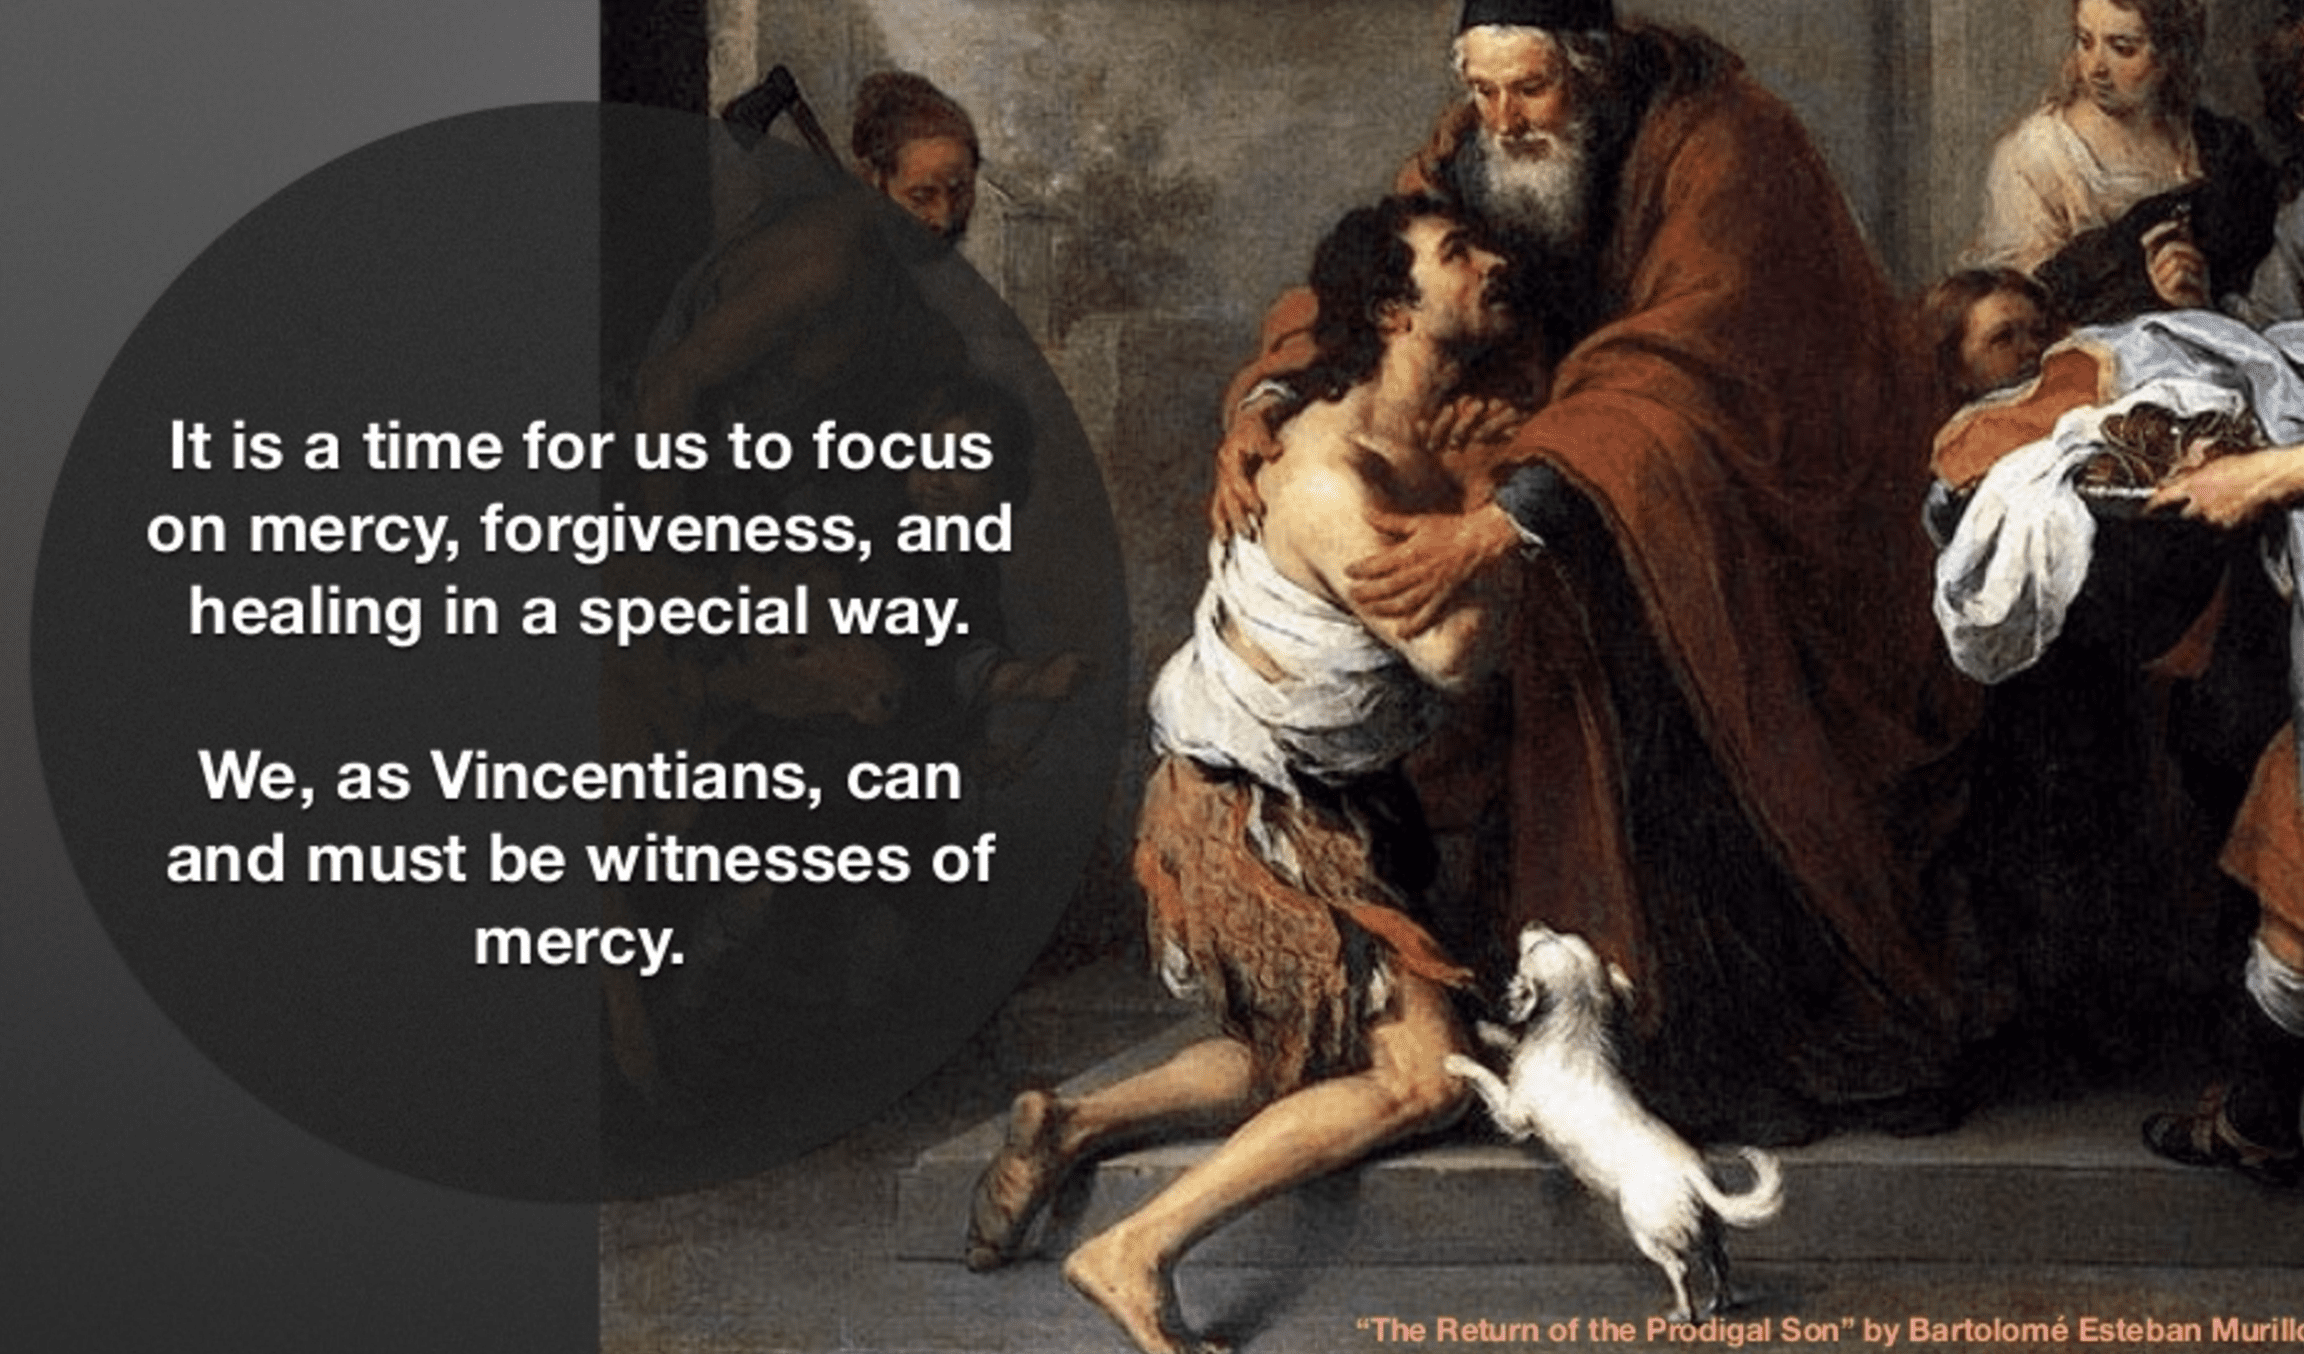 Year of Mercy – special concern of Vincentians